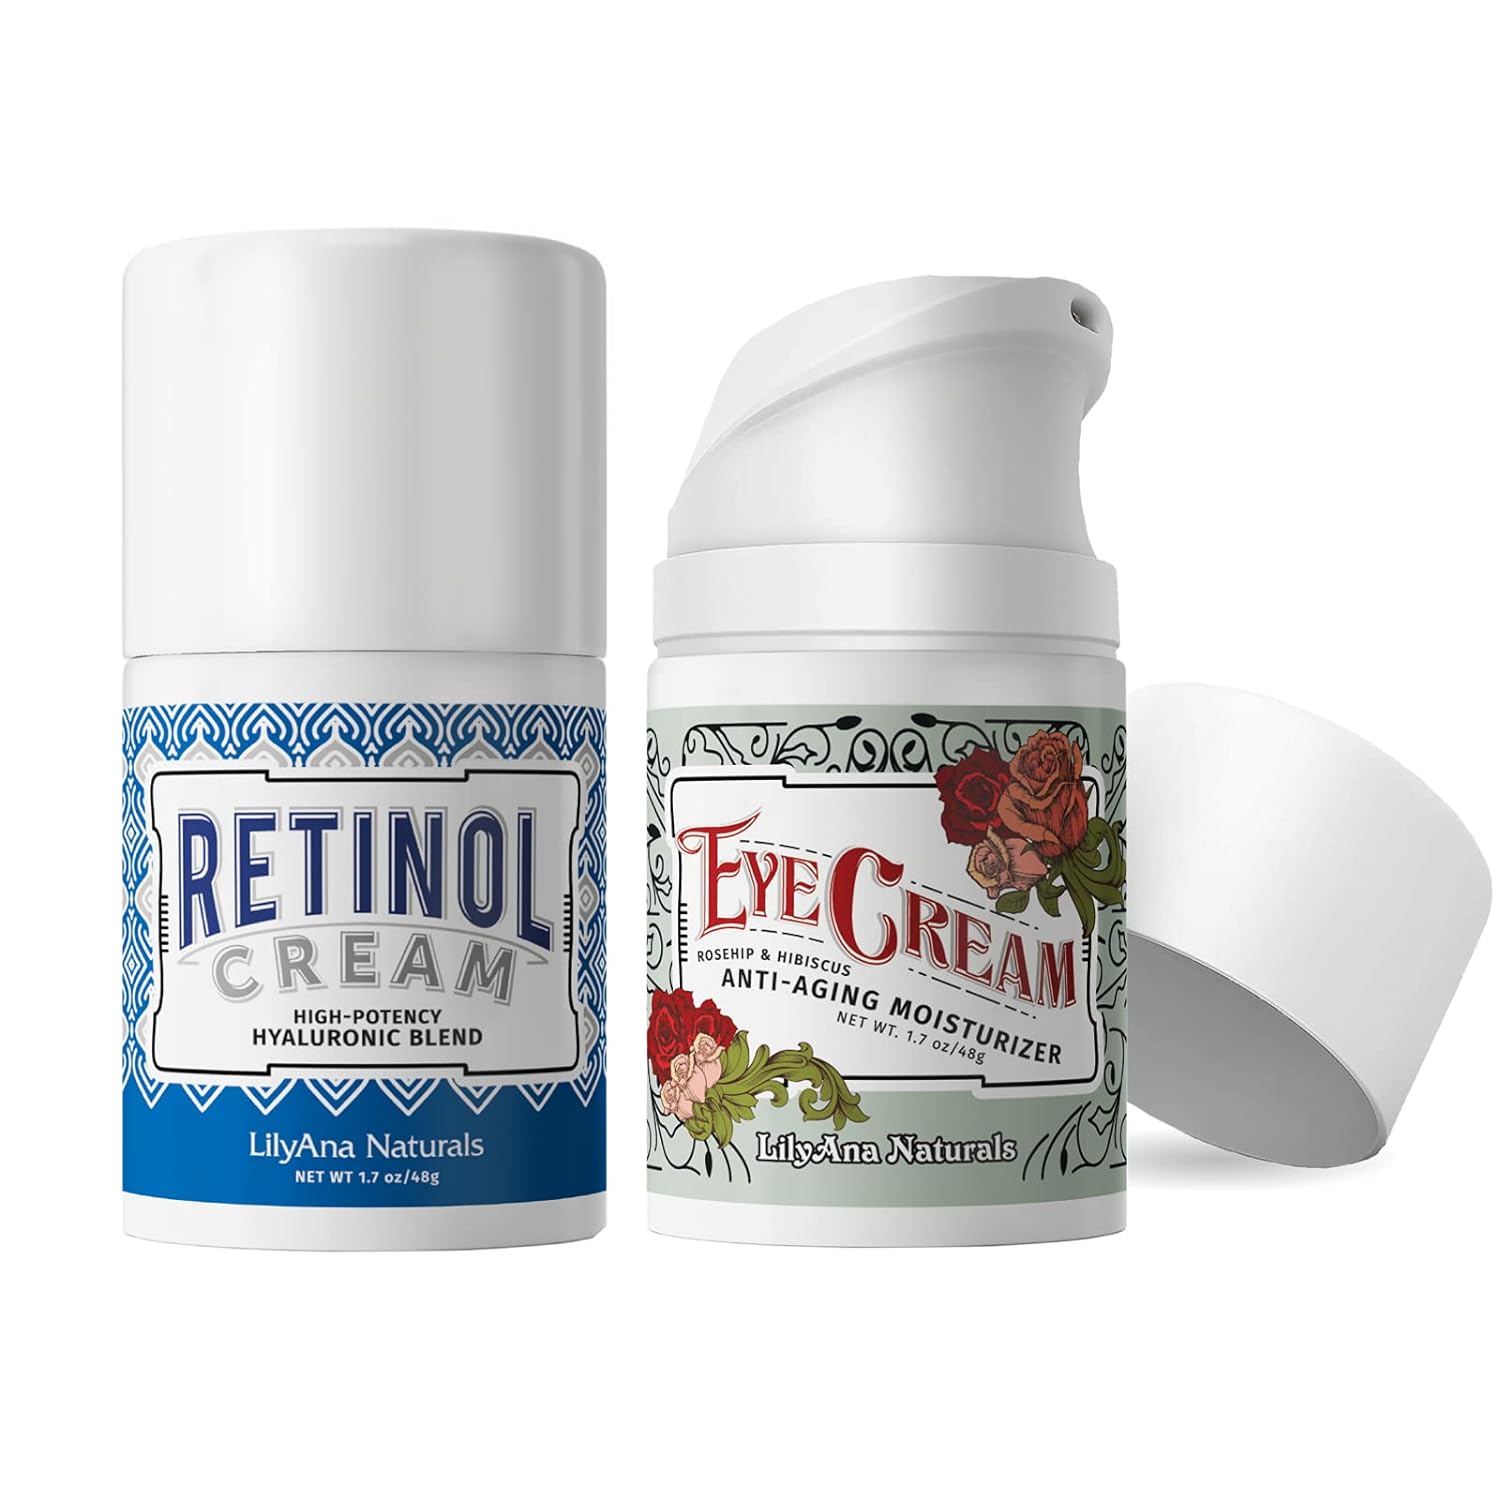 LilyAna Naturals Anti Aging Retinol Cream and Eye Cream Bundle 1.07 oz - Retinol Moisturizer for Face and Under Eye Cream for Dark Circles and Puffiness, Improve the look of Fine Lines and Wrinkles